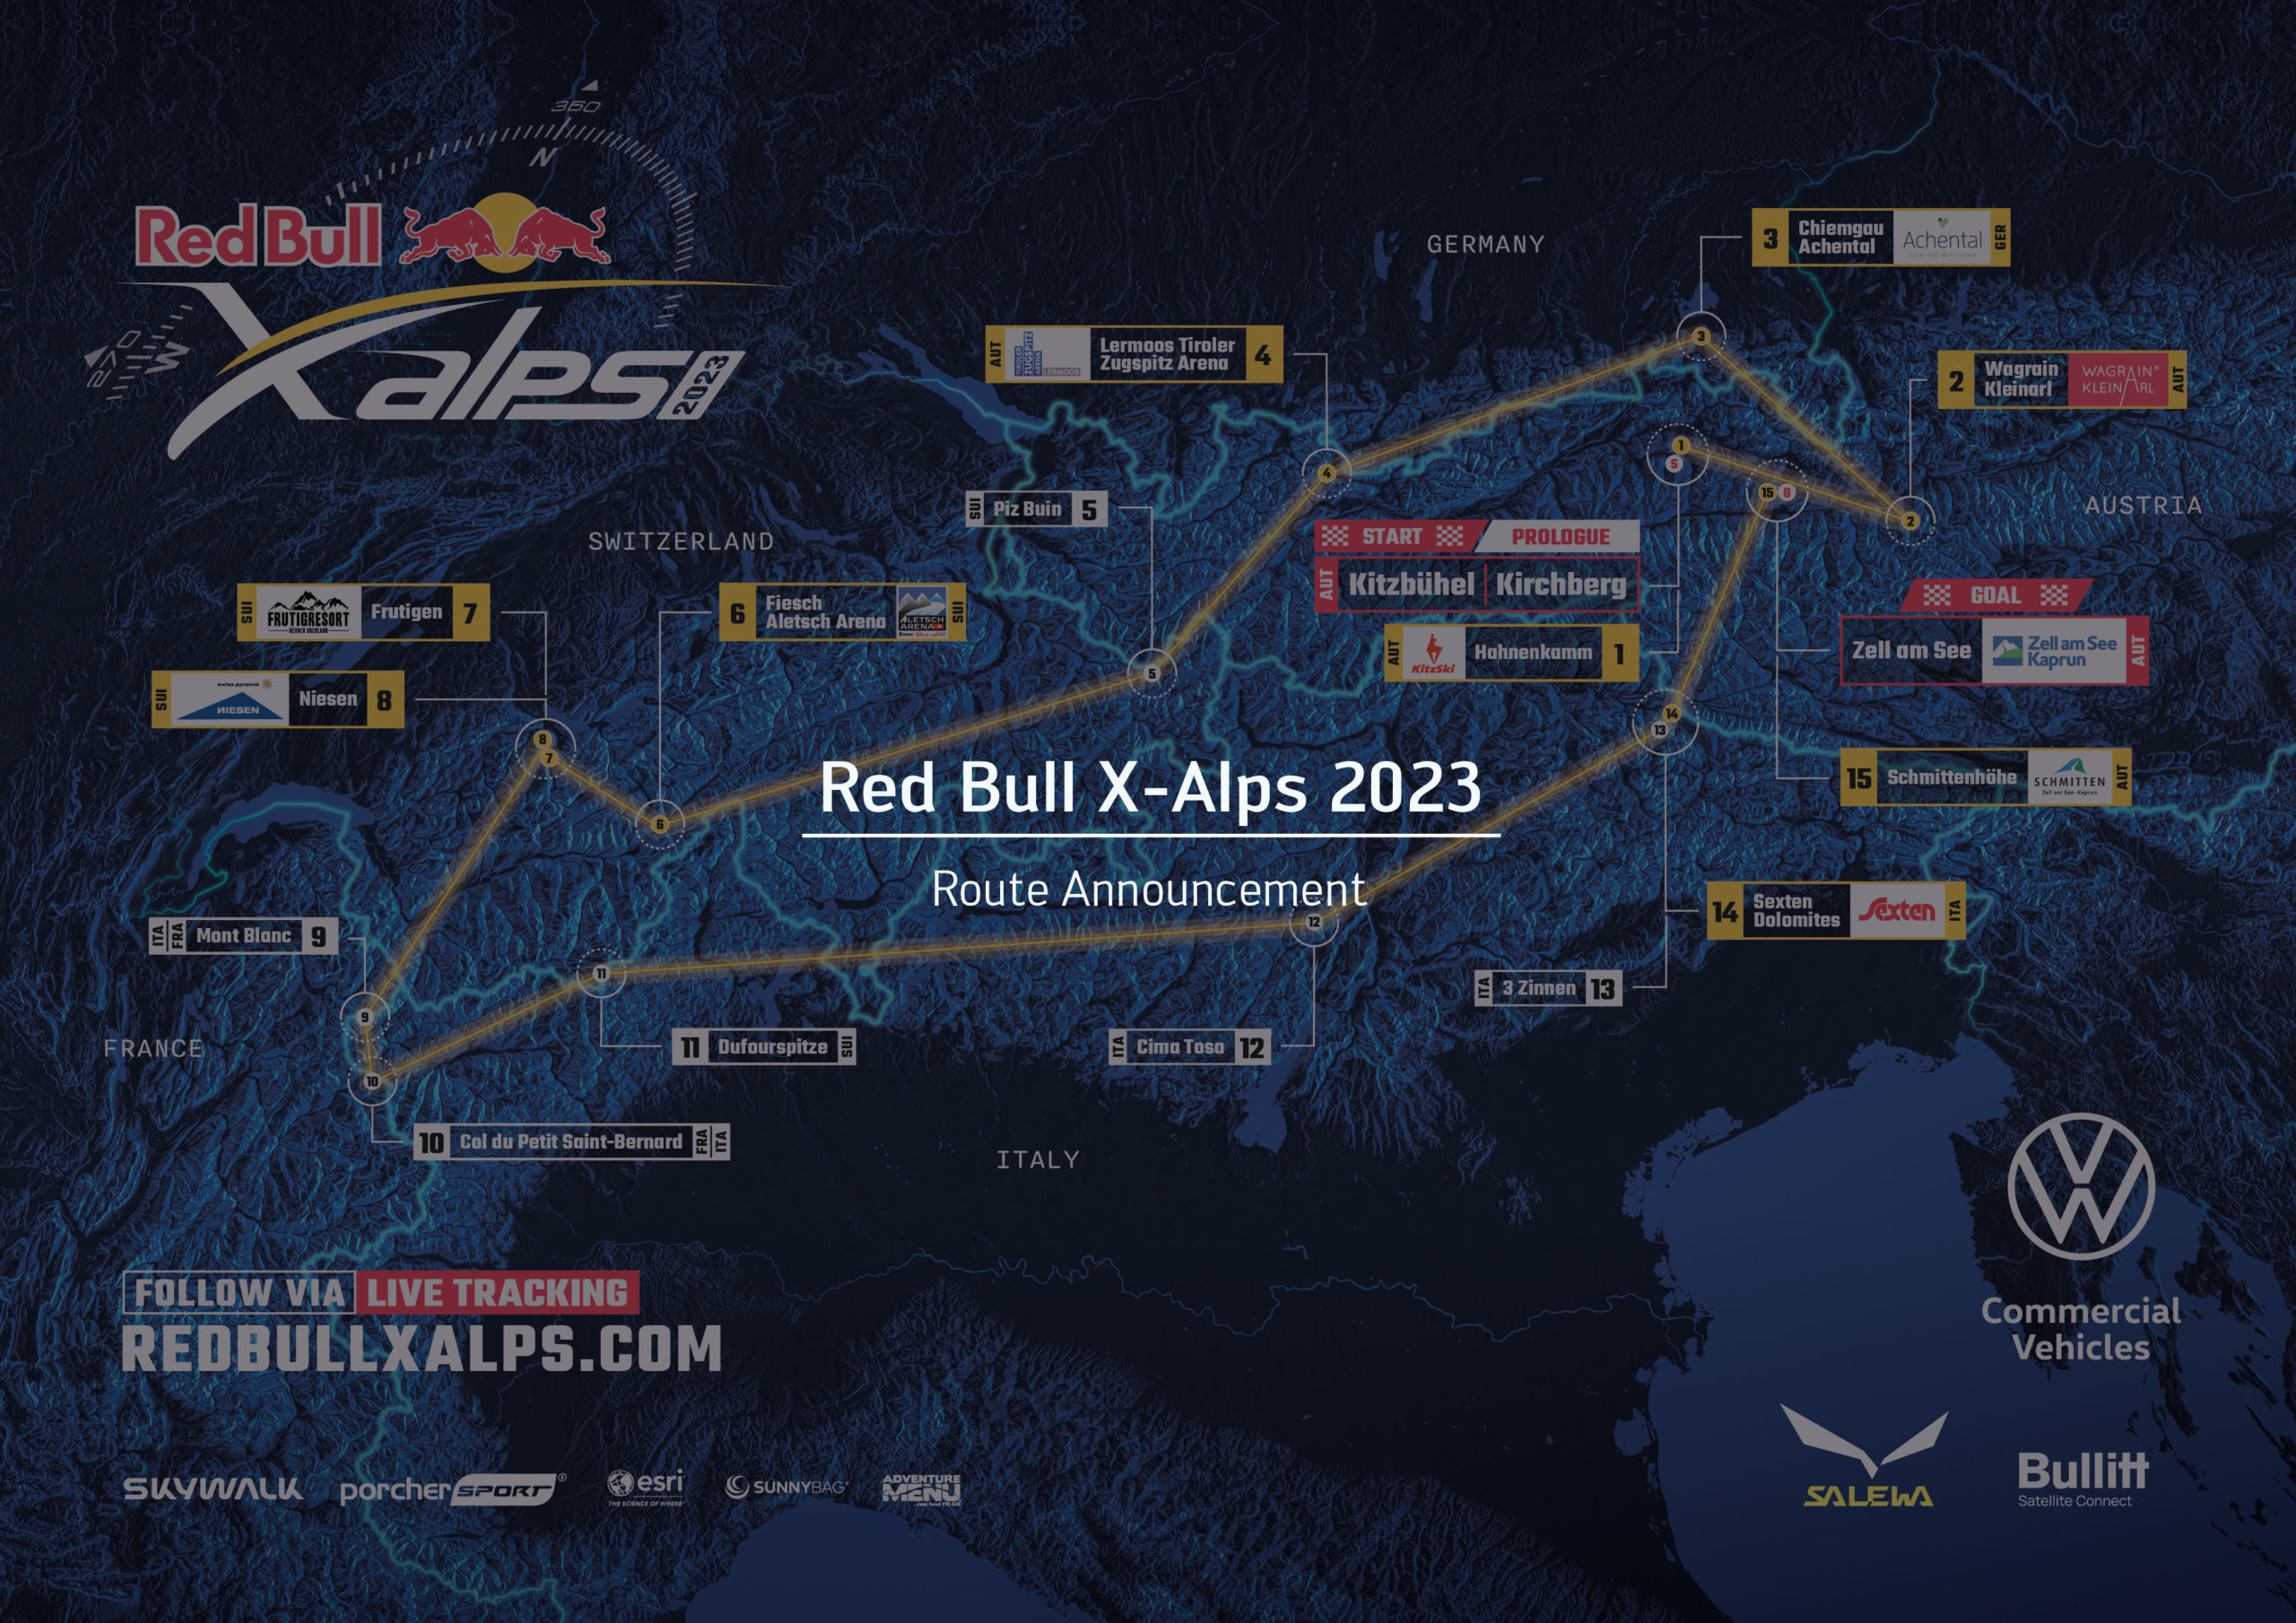 Red Bull XAlps 2023 Route Announcement skywalk Paragliders